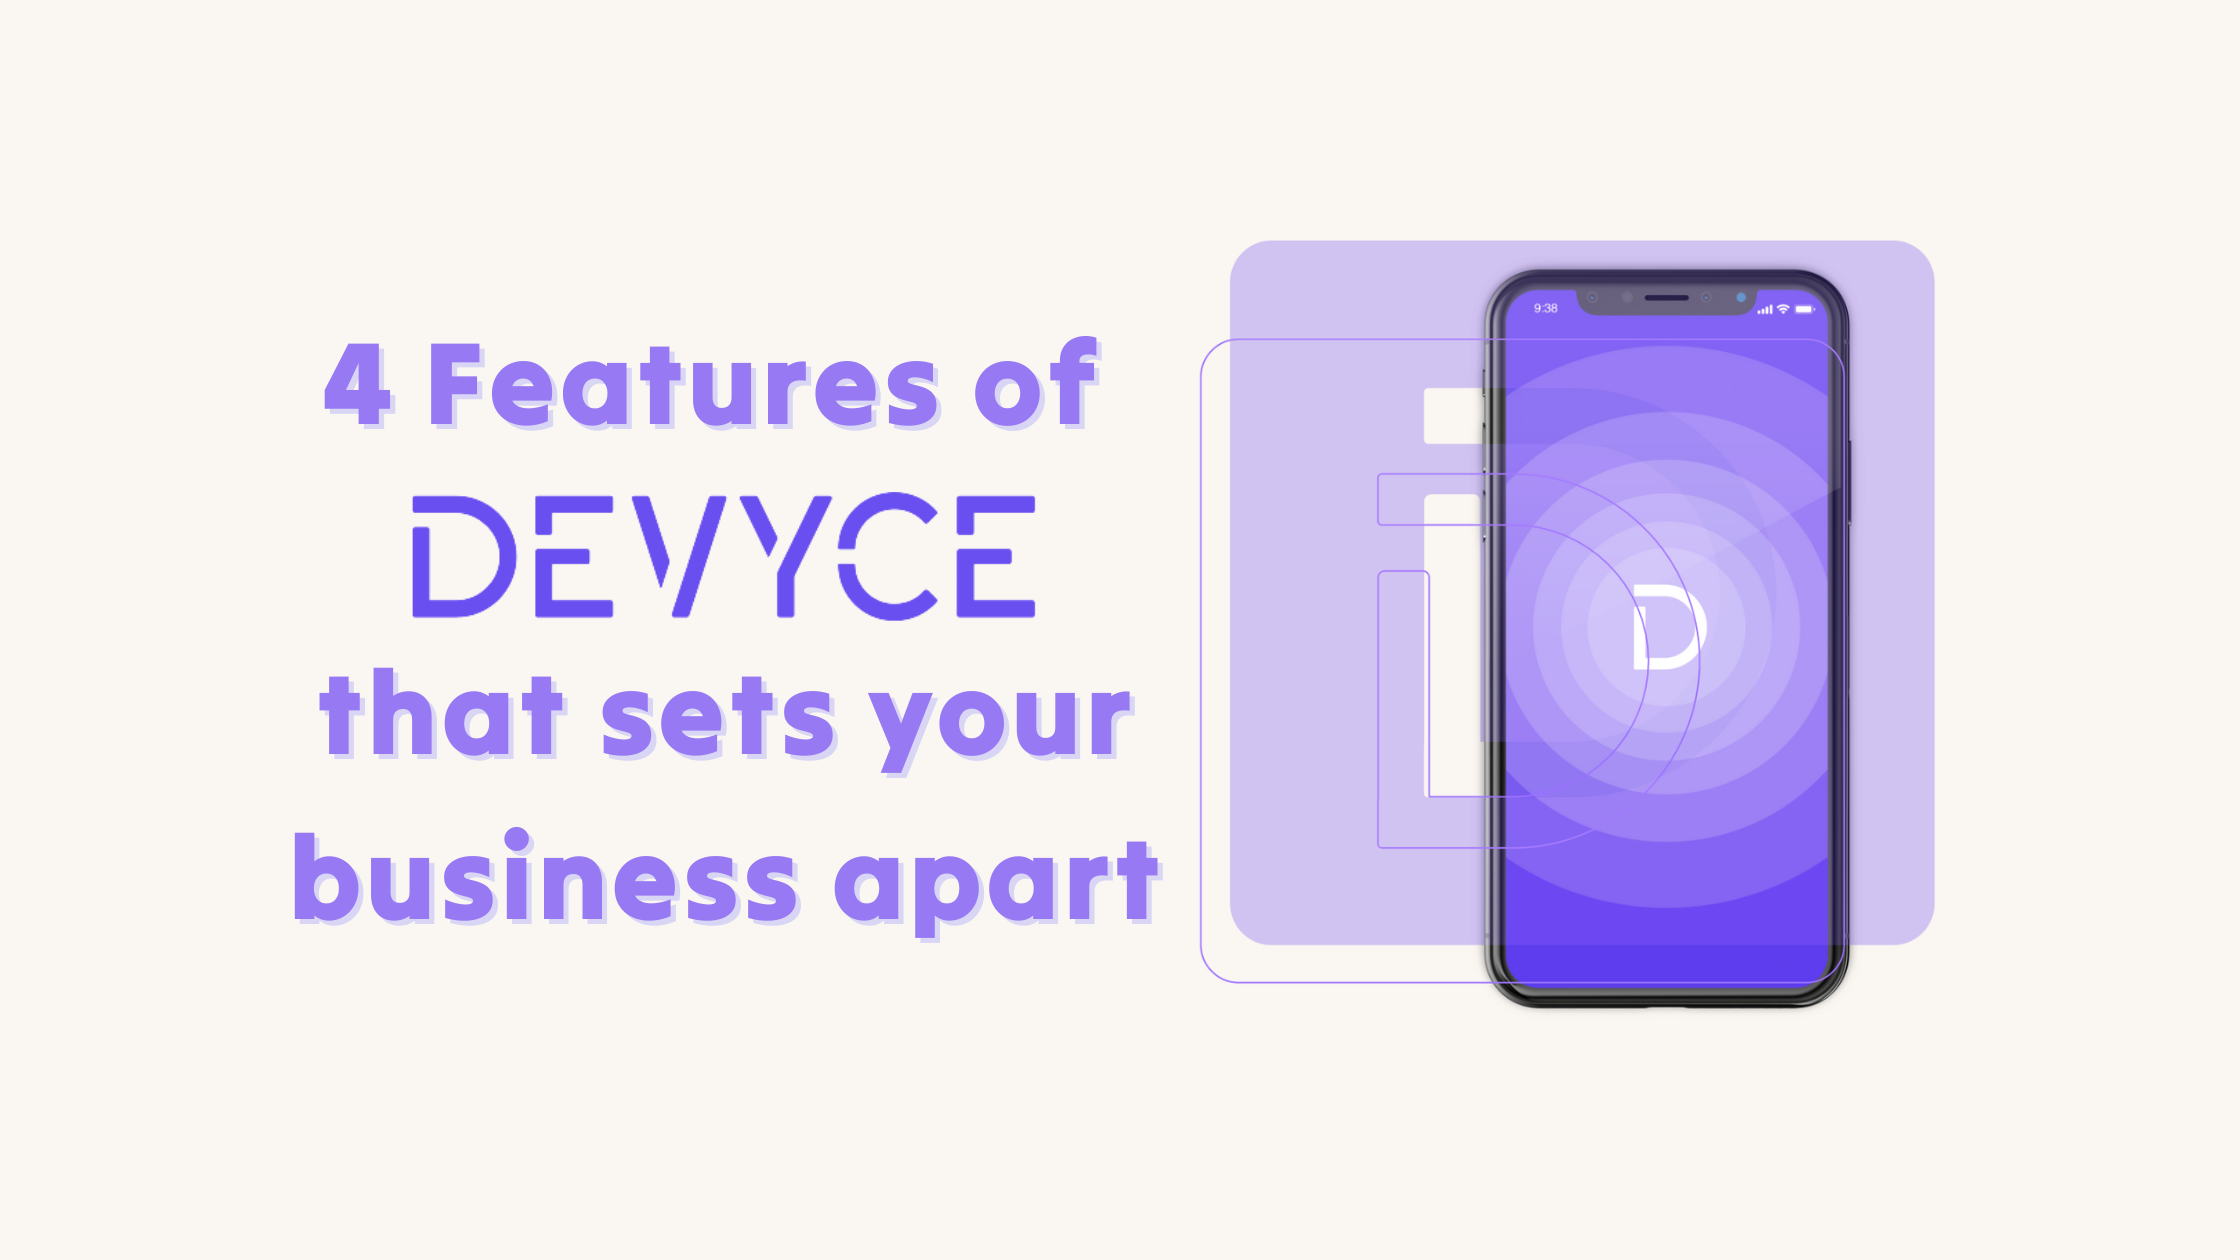 Graphic of a phone with the Devyce logo and a title of '4 features of Devyce that sets your business apart'